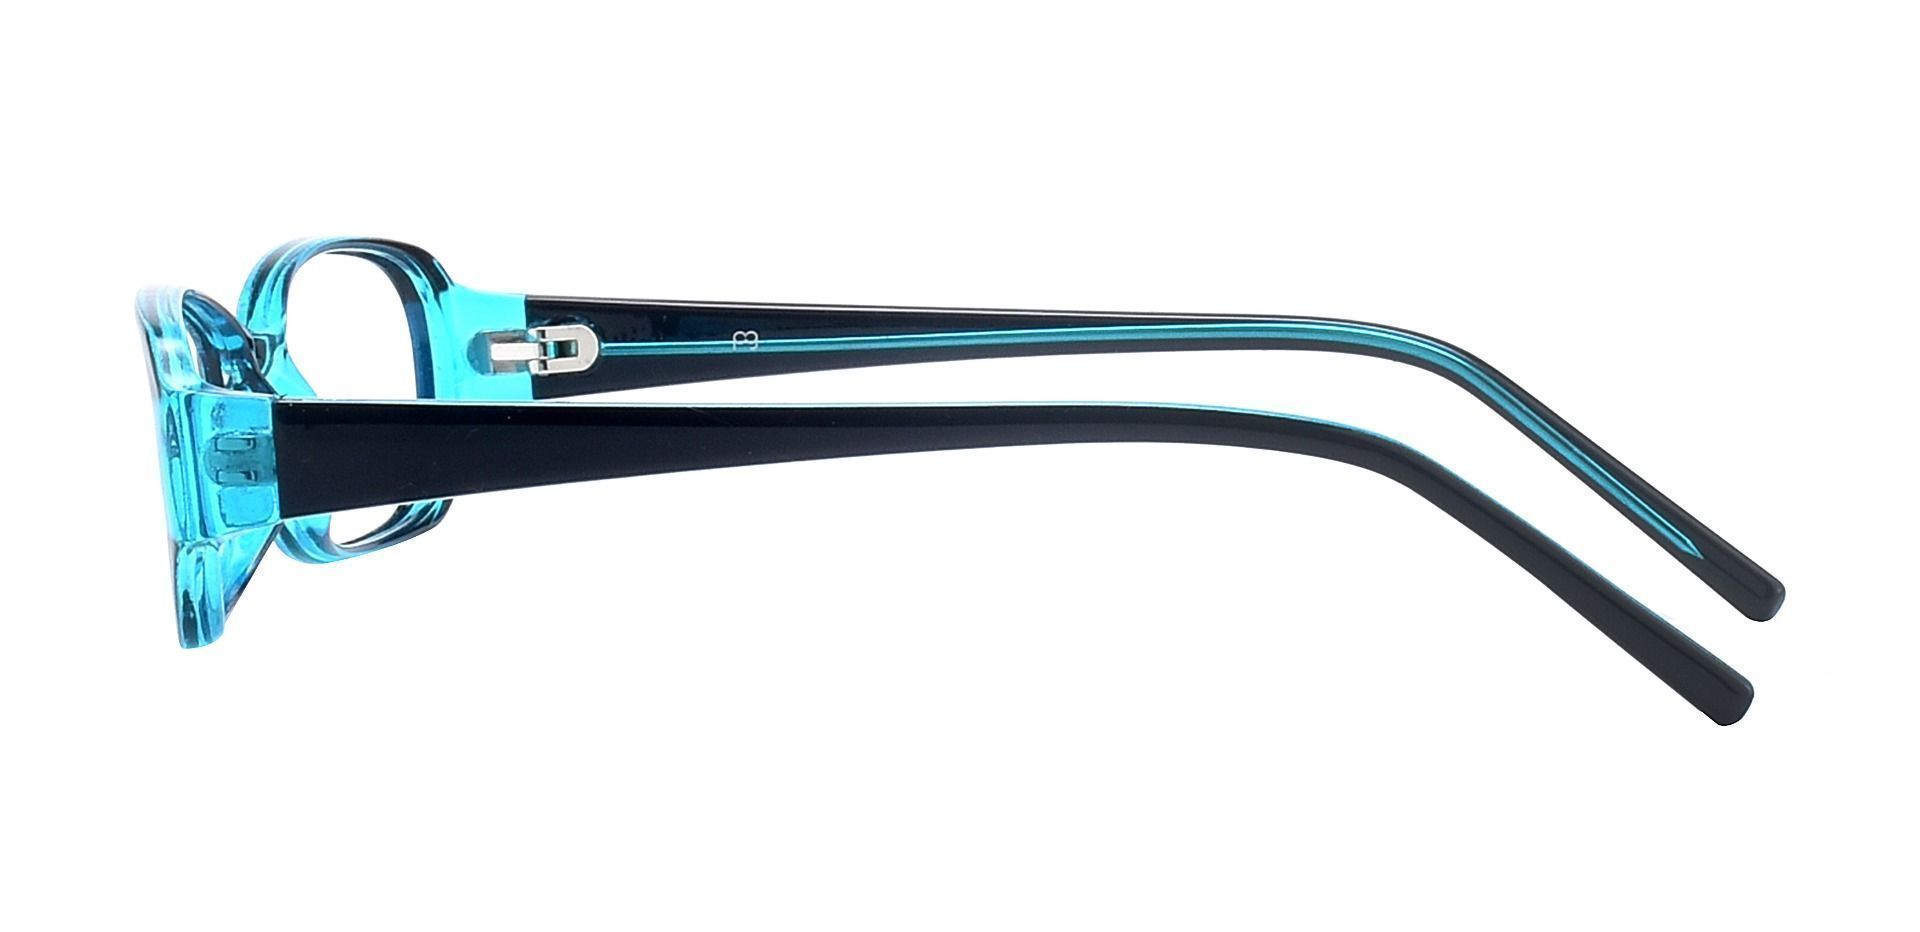 Nairobi Oval Single Vision Glasses - The Frame Is Black And Blue